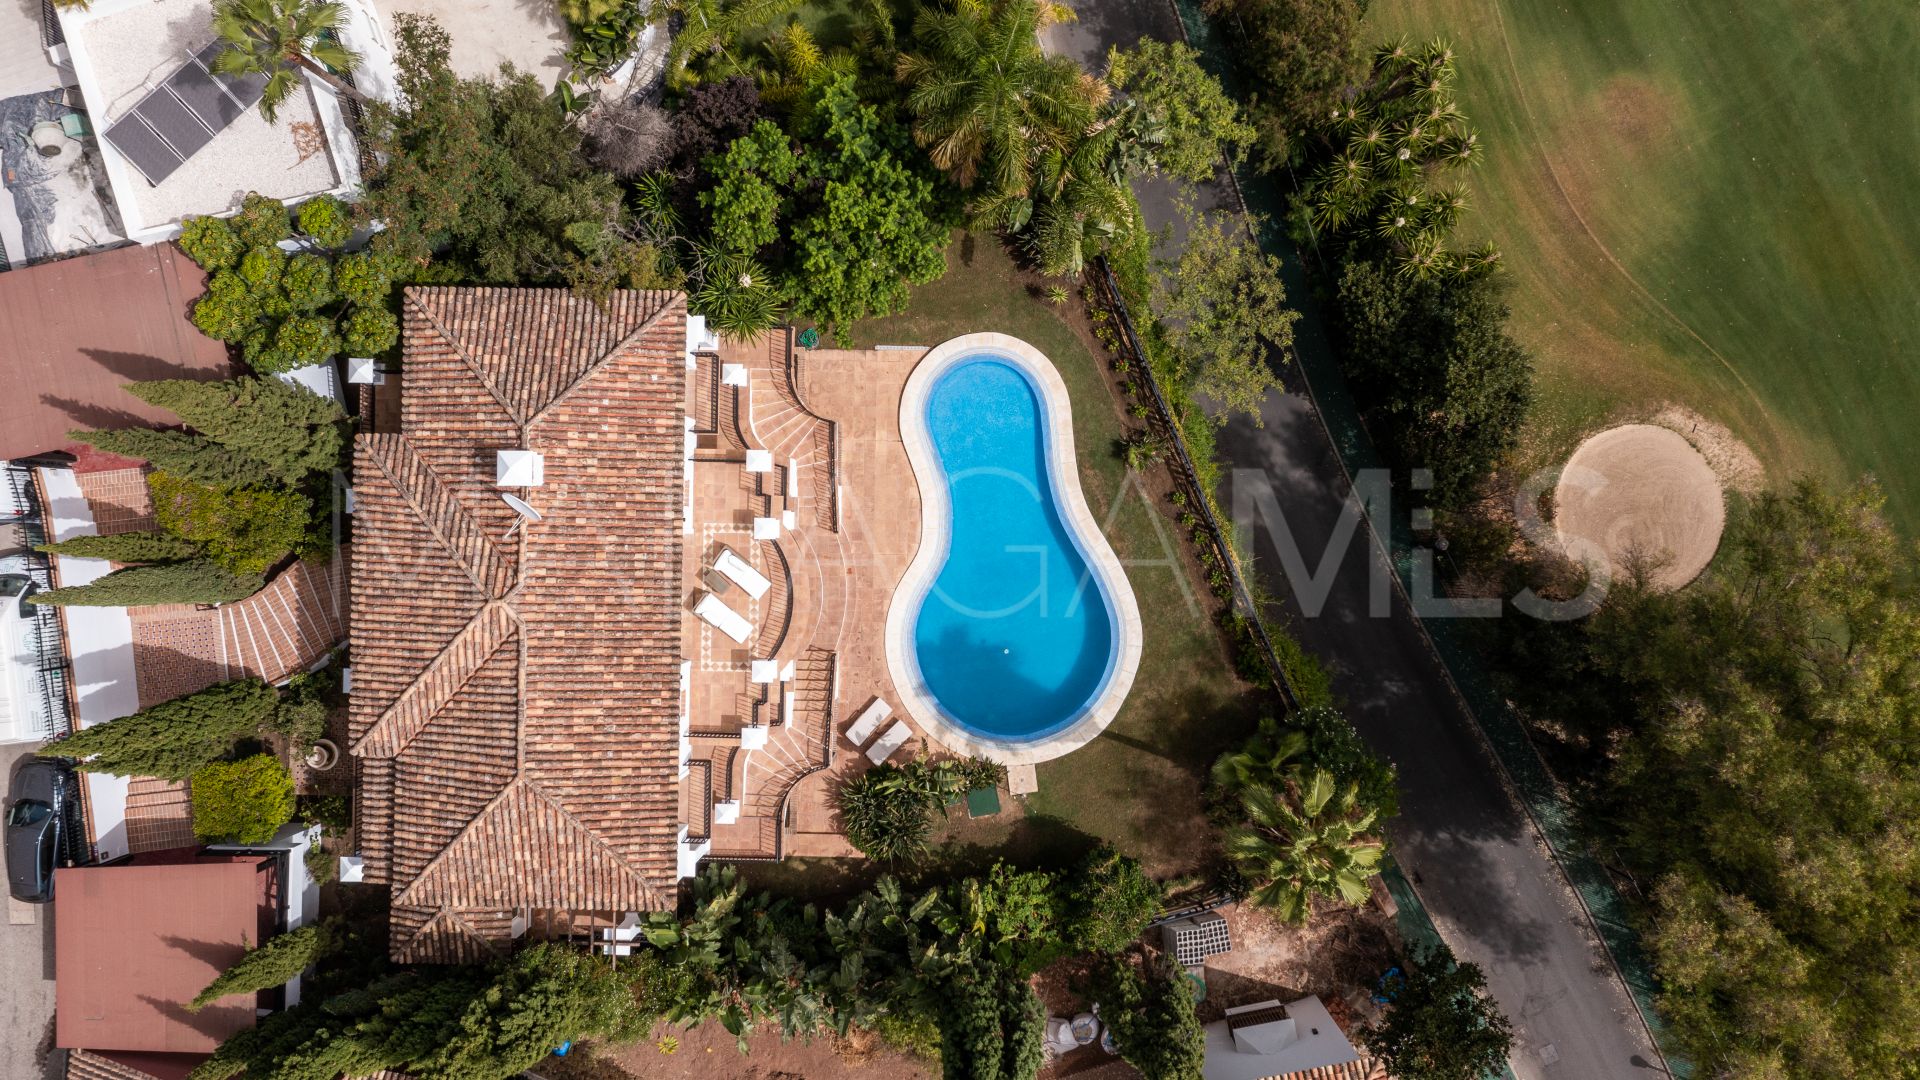 Villa for sale with 8 bedrooms in Marbella